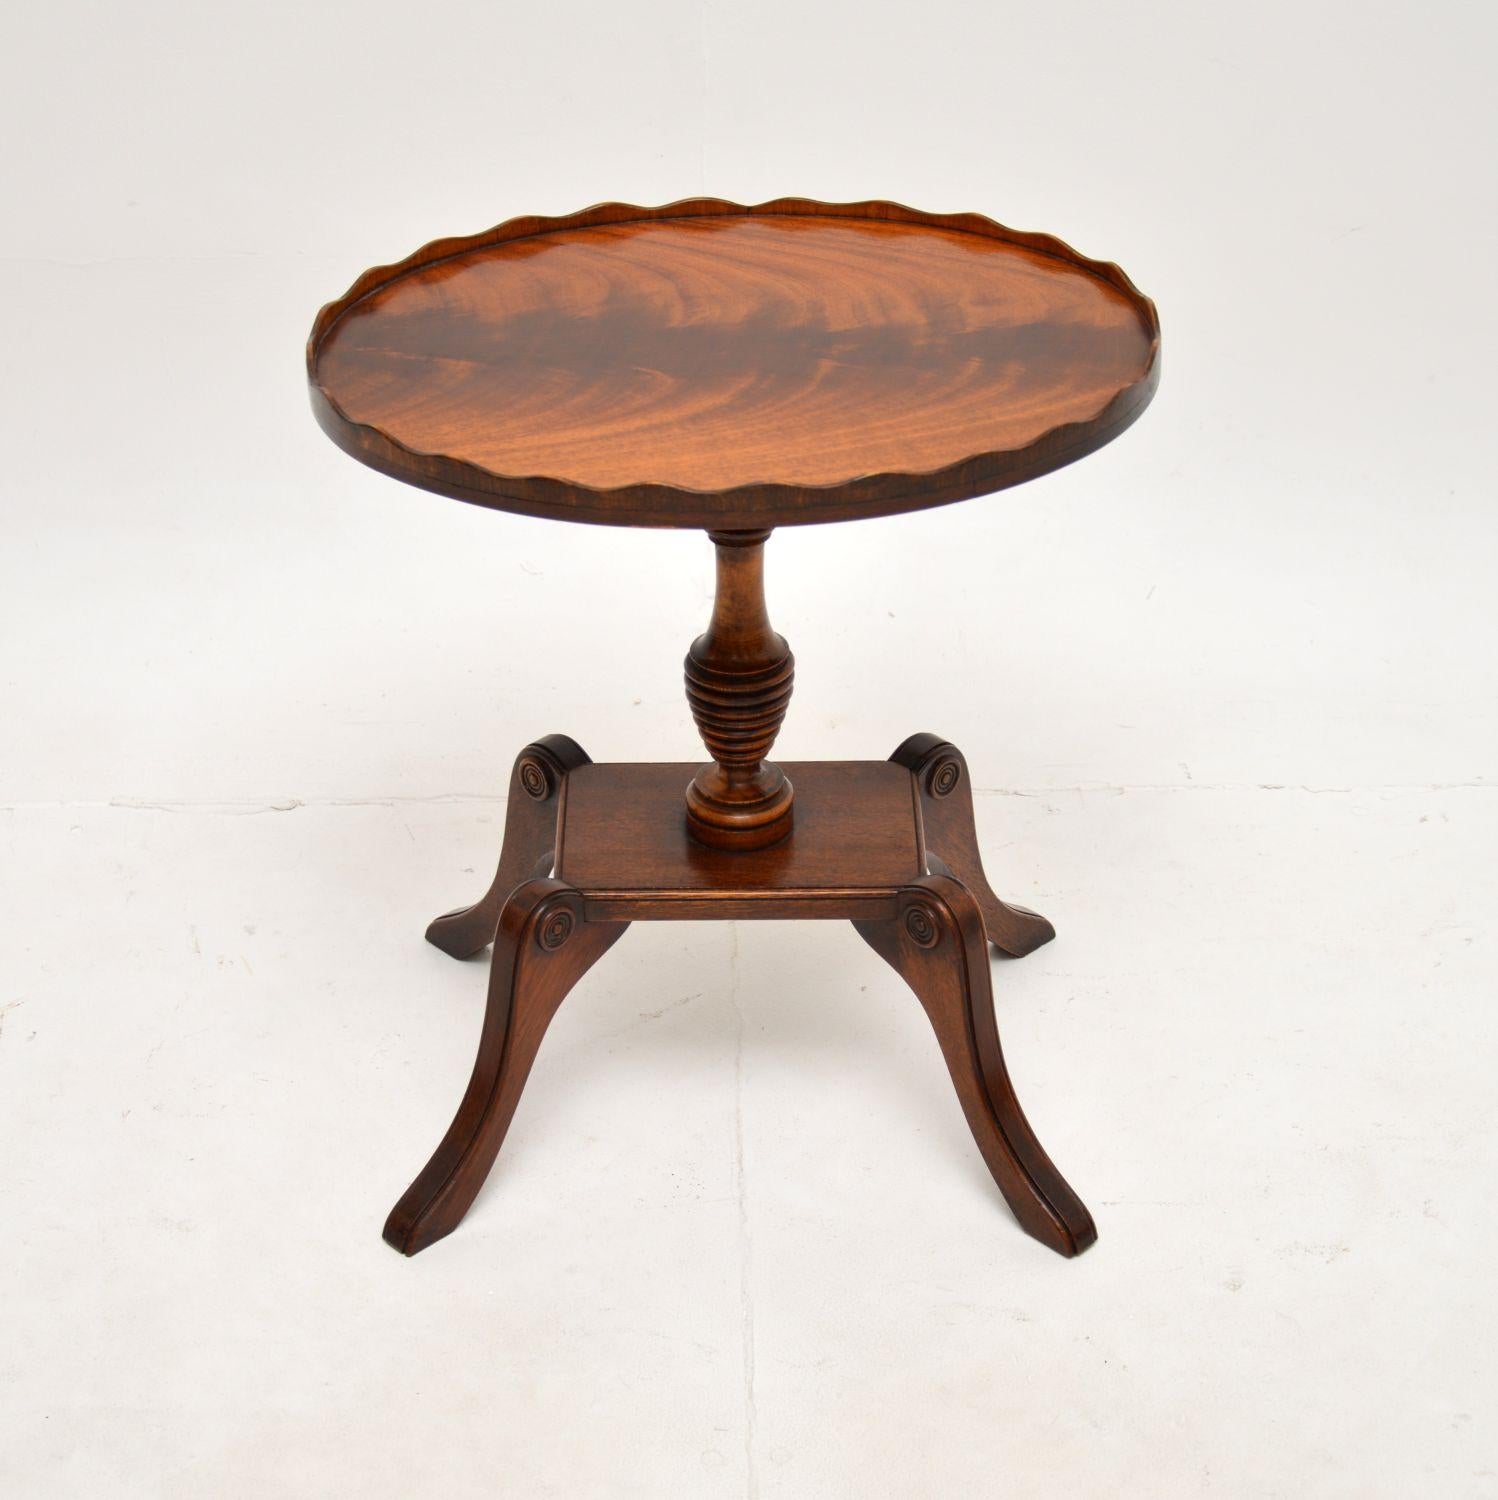 A beautifully made antique Regency style pie crust coffee / side table. This was made in England, it dates from around the 1950’s.

The oval top has gorgeous grain patterns and a raised pie crust edge. It sits on a beautifully turned central column